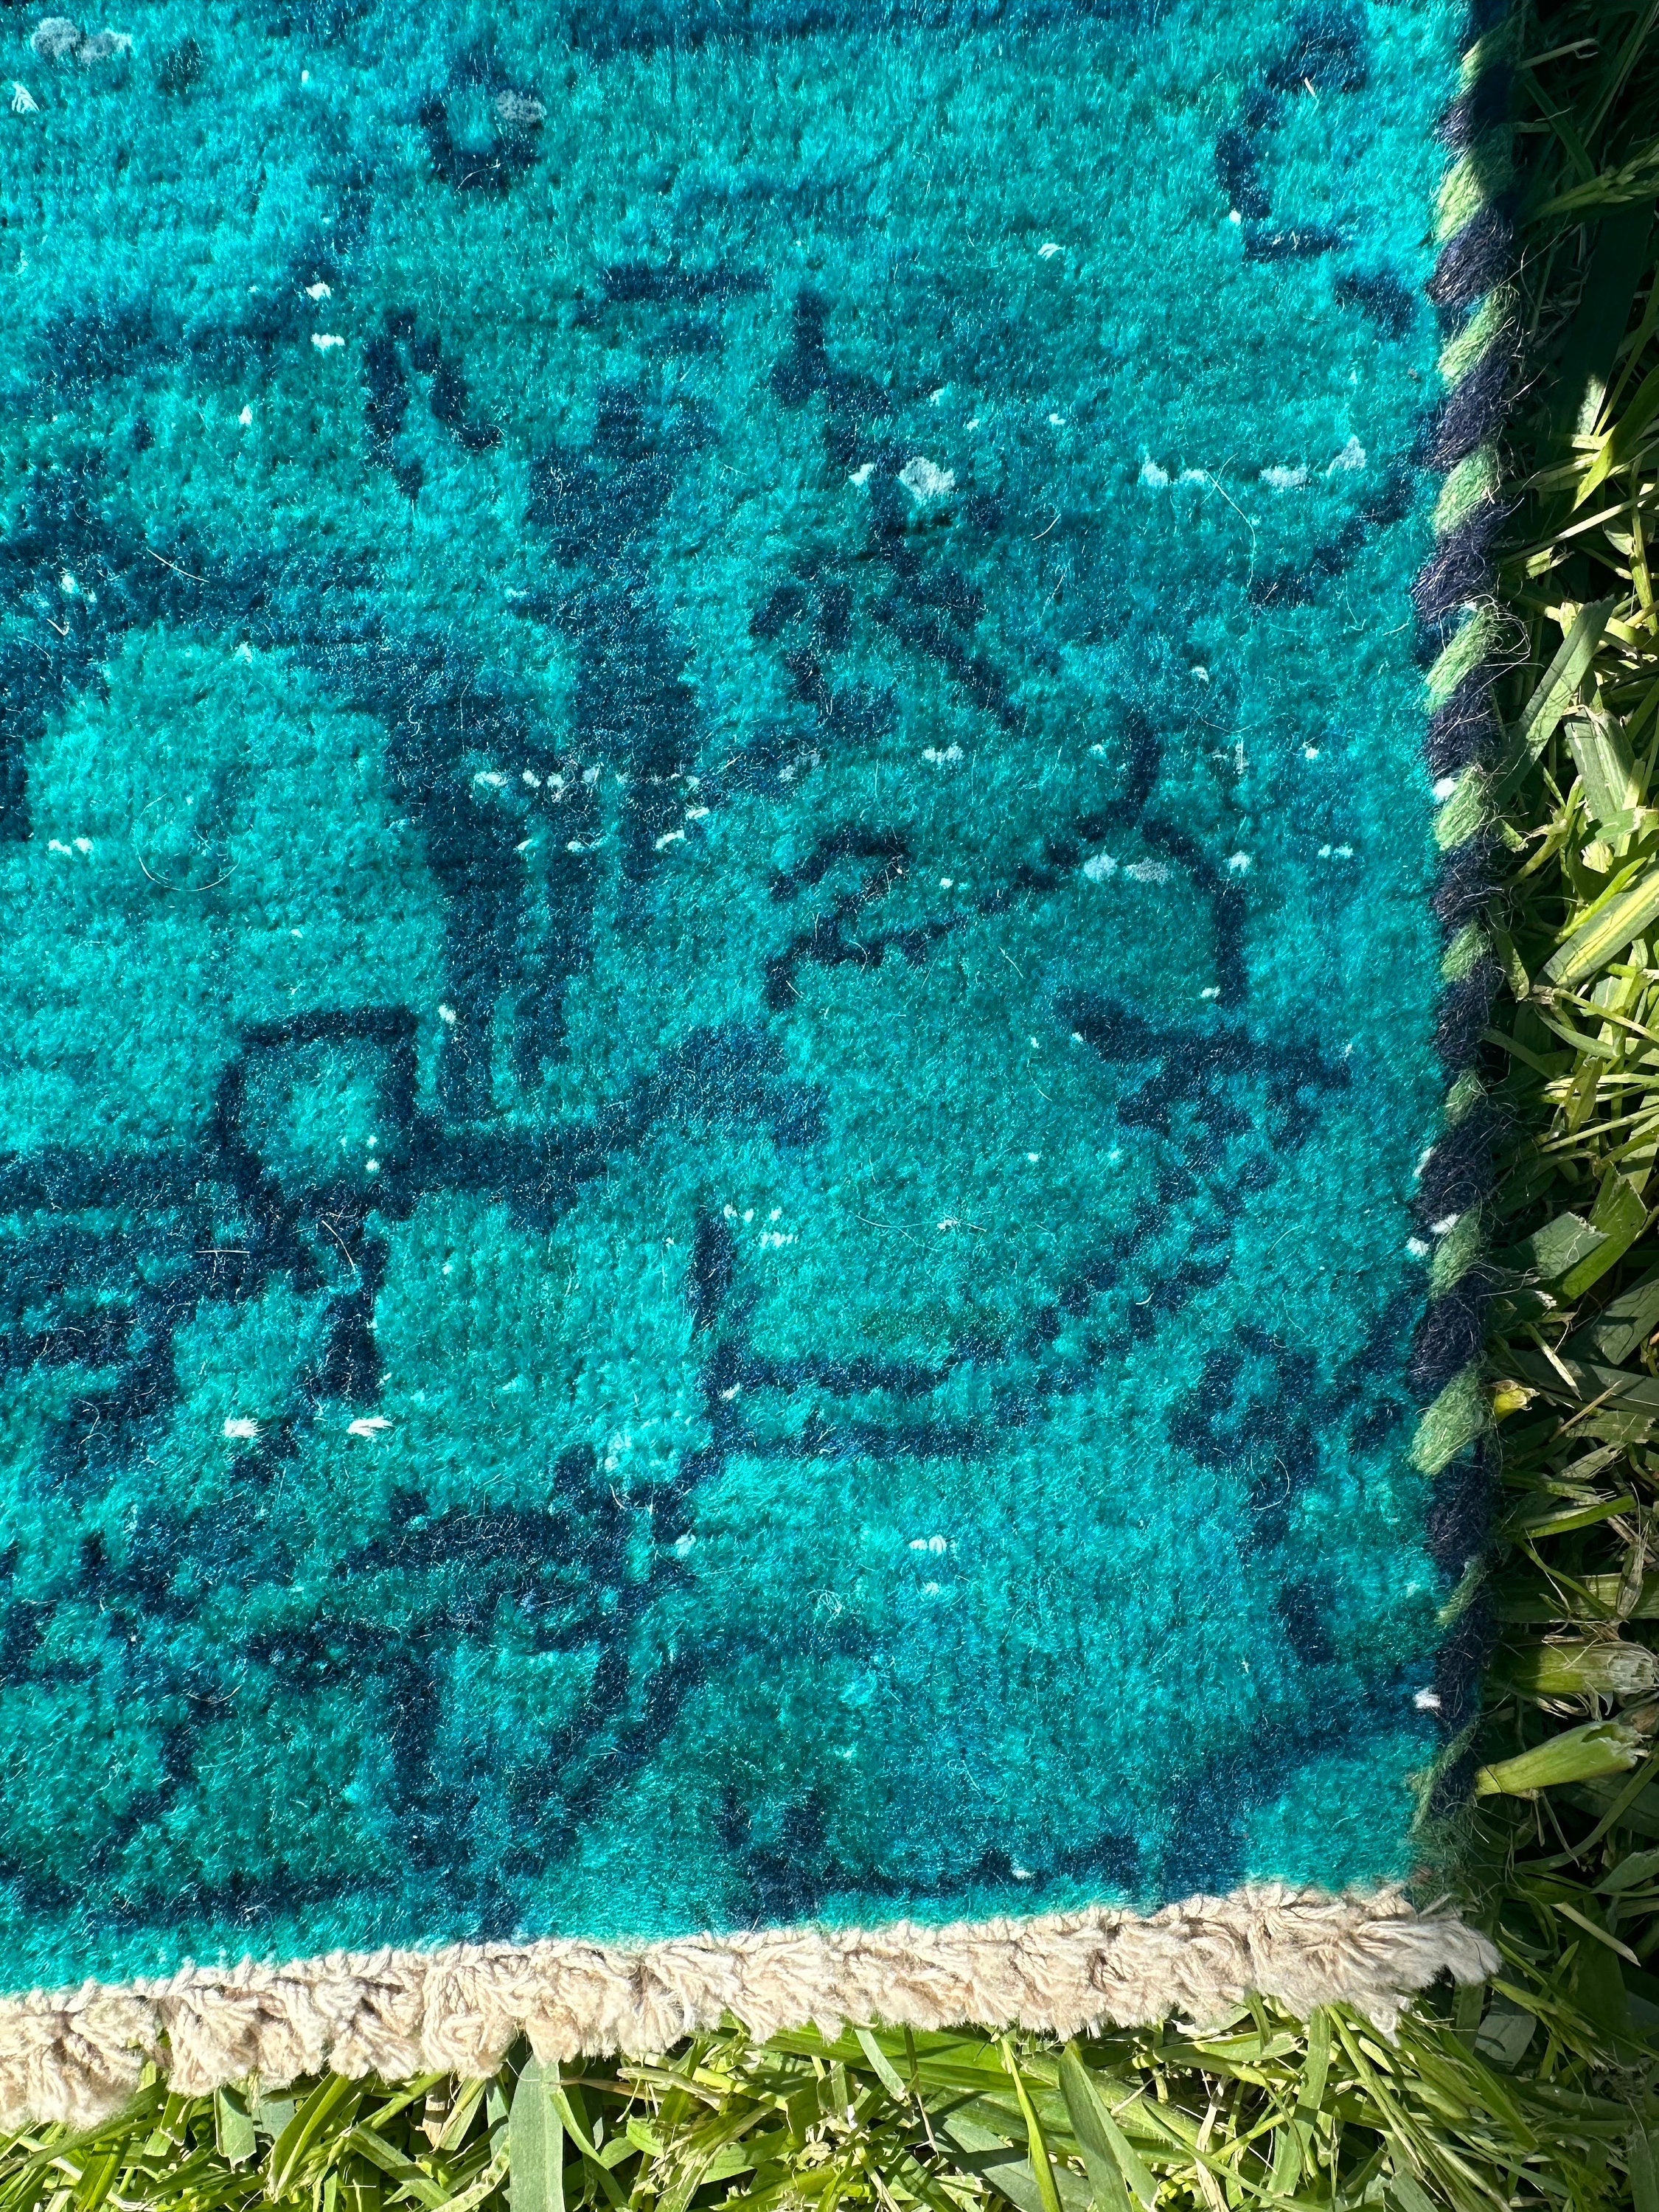 Vintage Overdyed Persian Wool Rug in Teal 6x5 ft | Hand Woven Green Blue Vegetable Dye Geometric Pattern Area Rug | Boho Chic Living Room